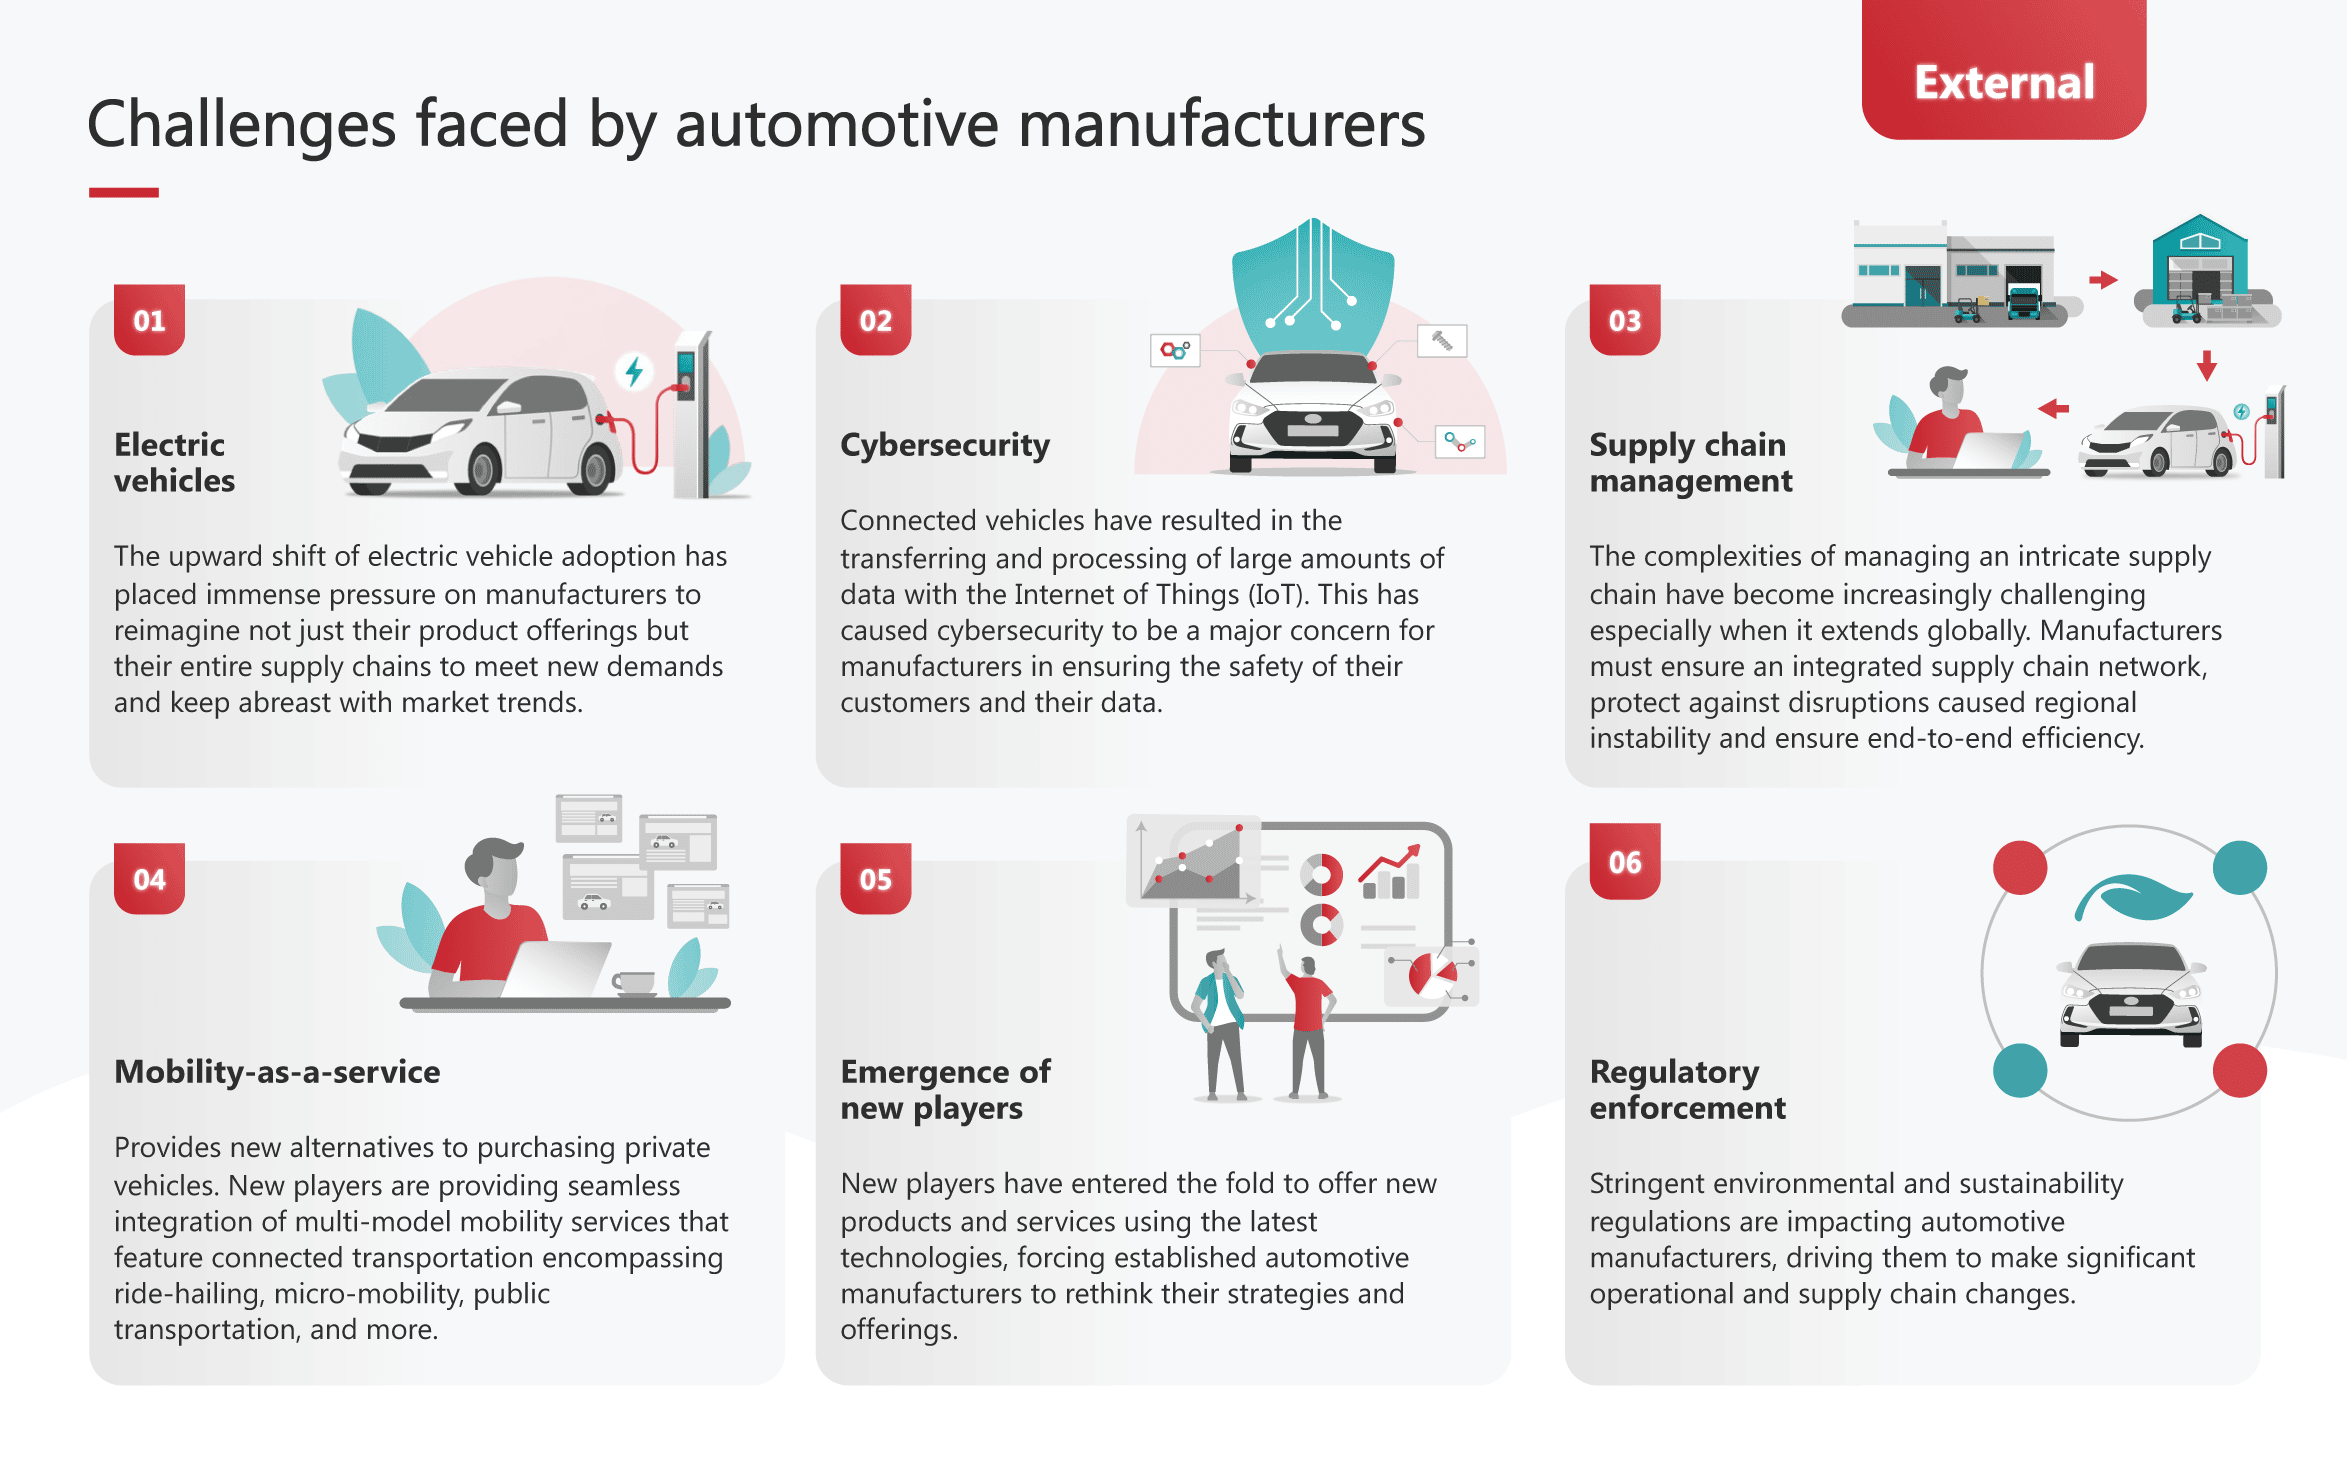 External challenges faced by automotive manufacturers